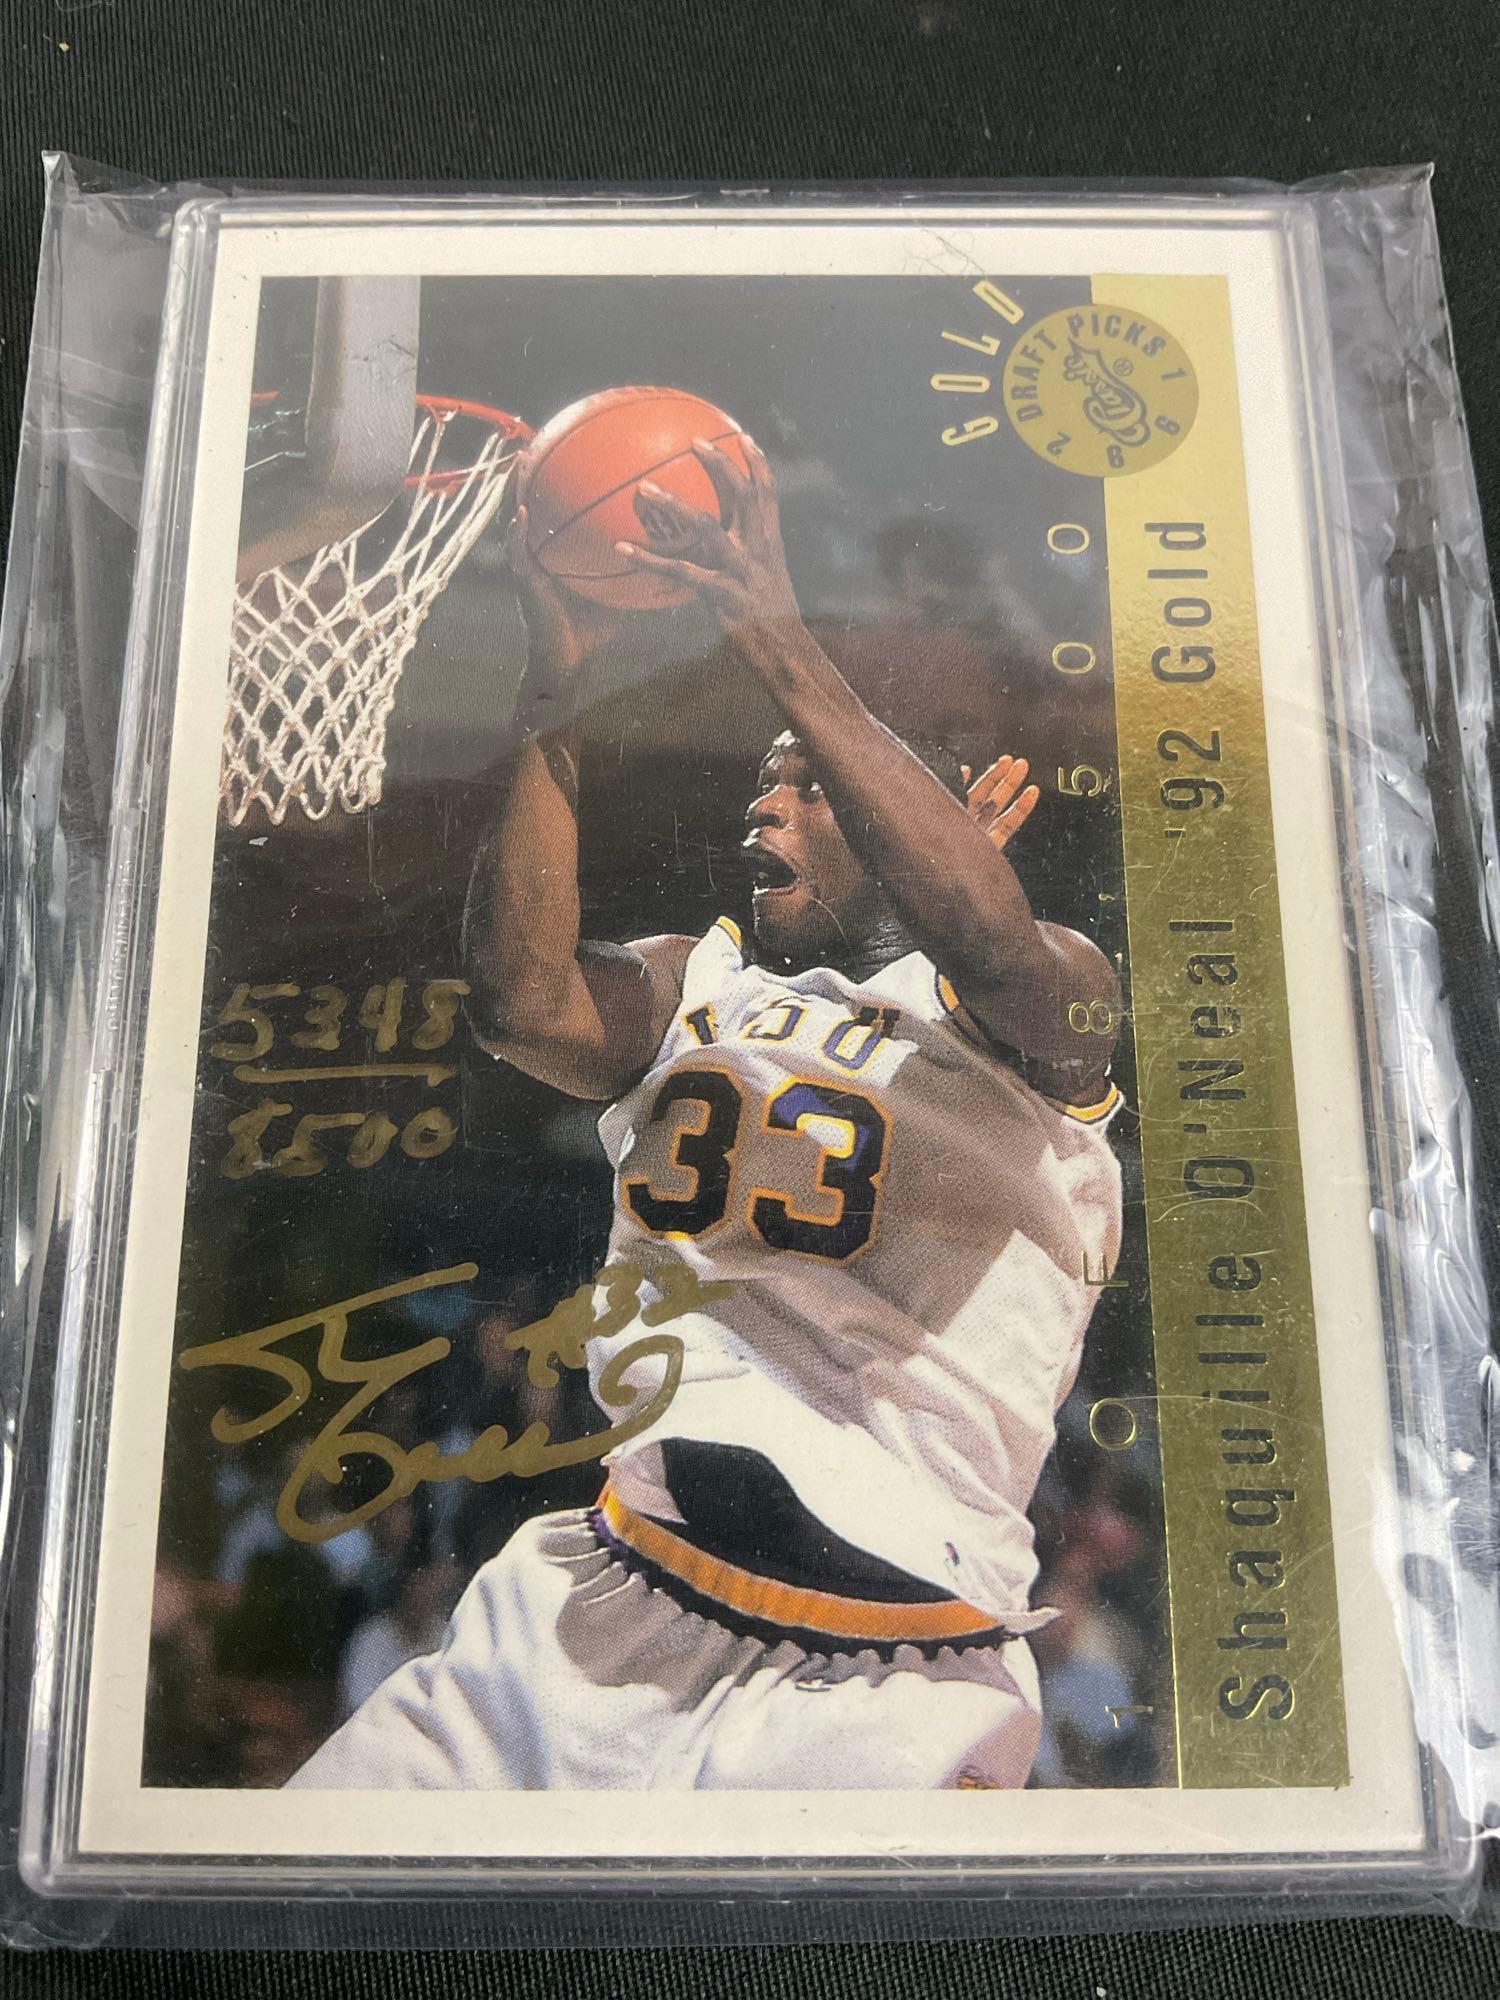 1992 Shaquille O'Neal Classic Gold Rookie RC Autographed Card LE 5348/8500